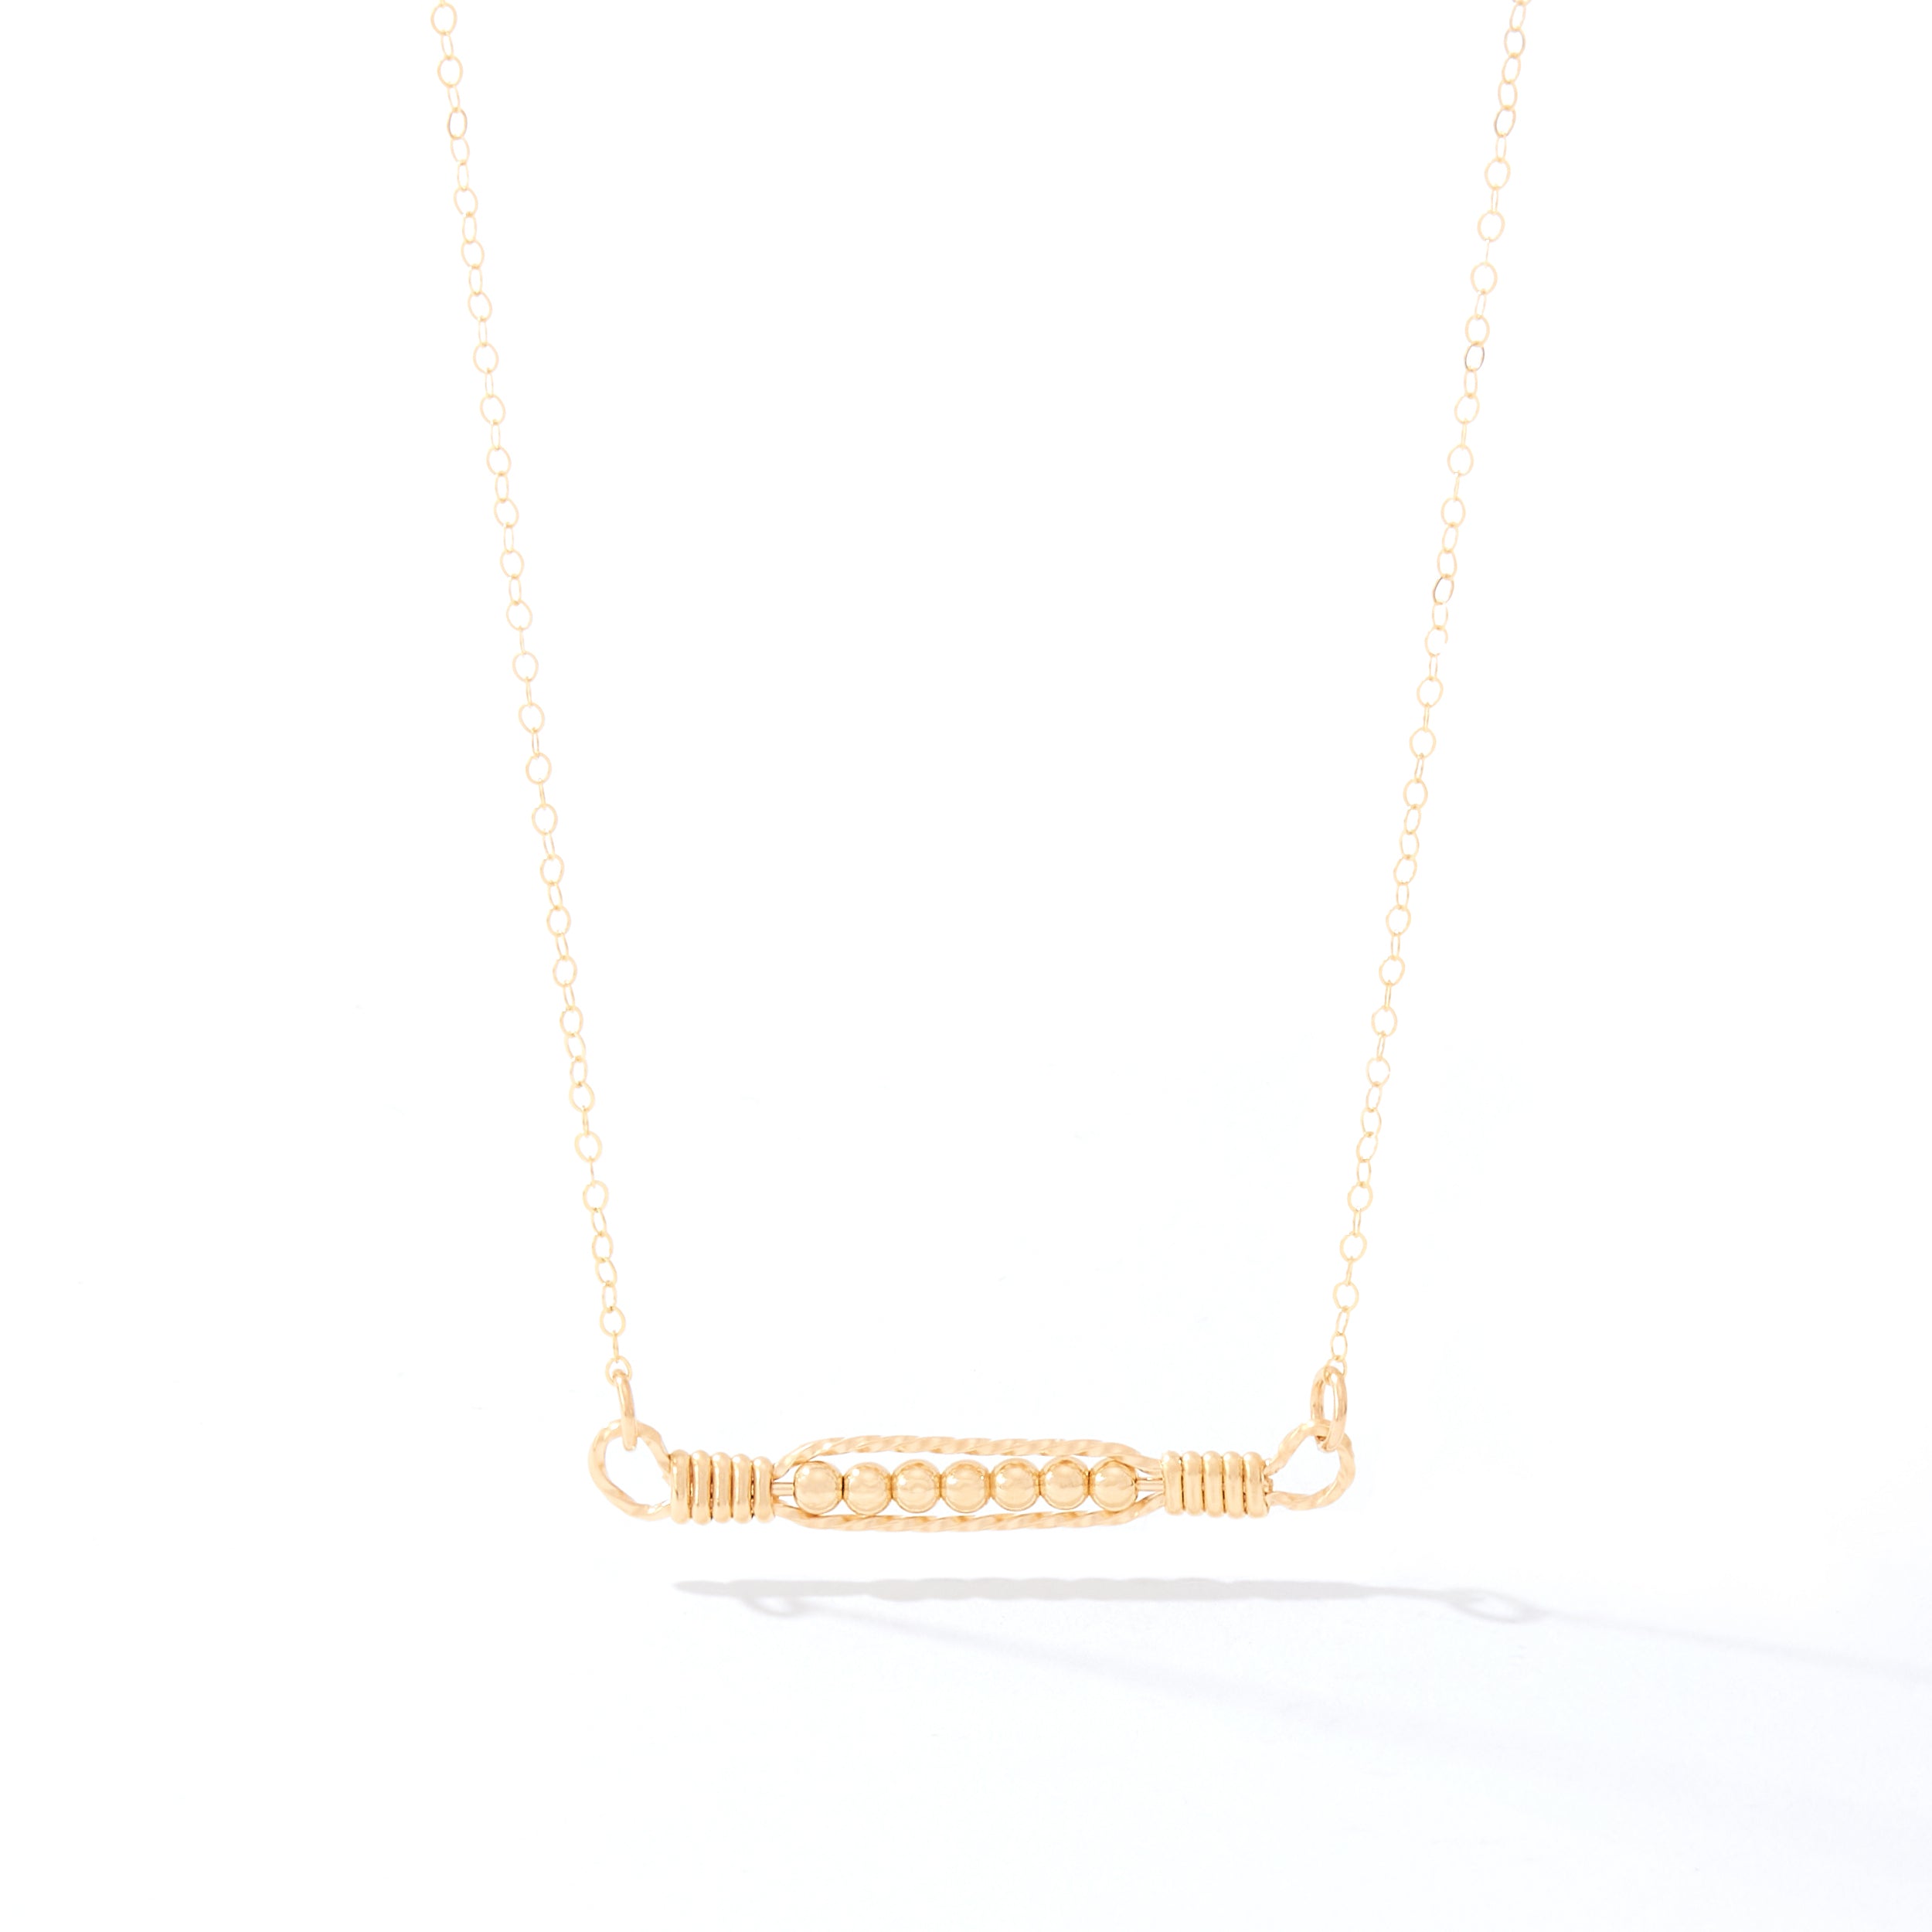 Power of Prayer Necklace 14K Gold, Gold Chain